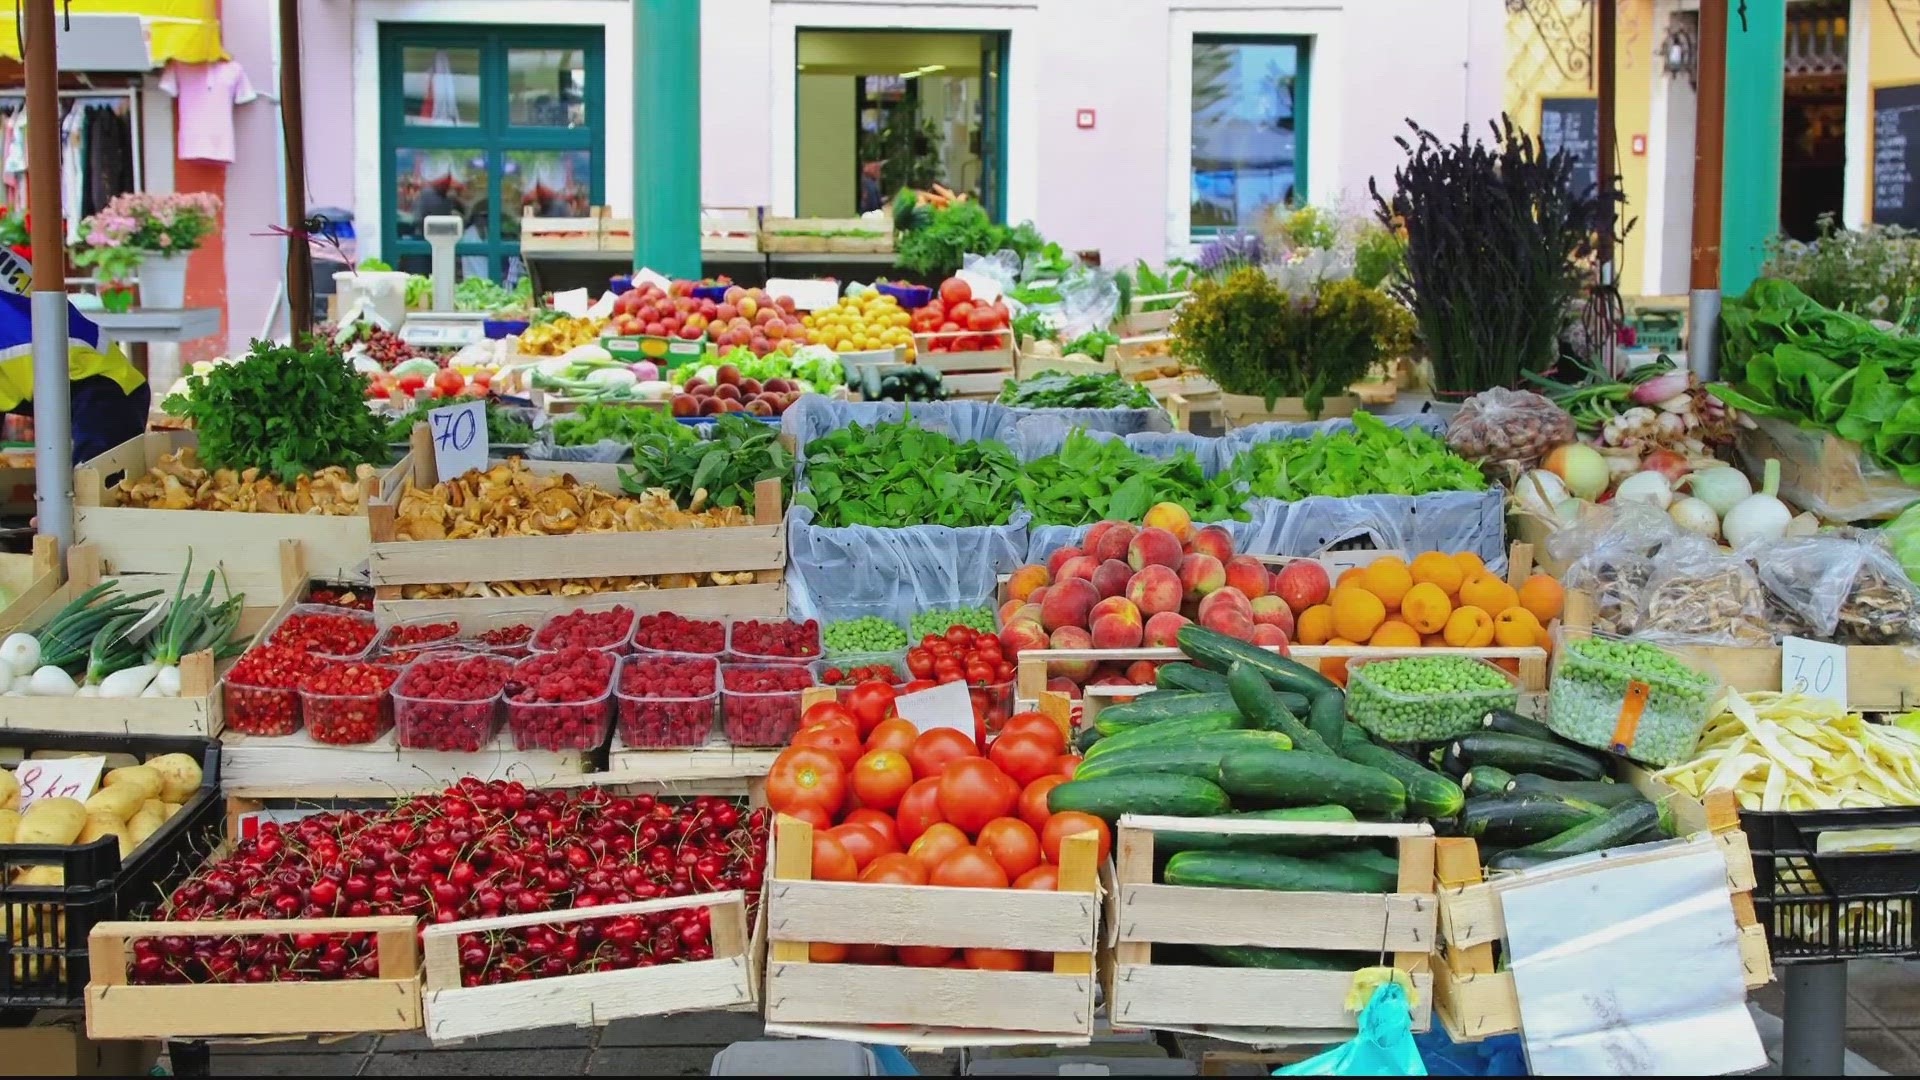 "When you're going shopping consider how you can shop more locally and sustainably. A great way to do that in the DC area is through farmers markets."